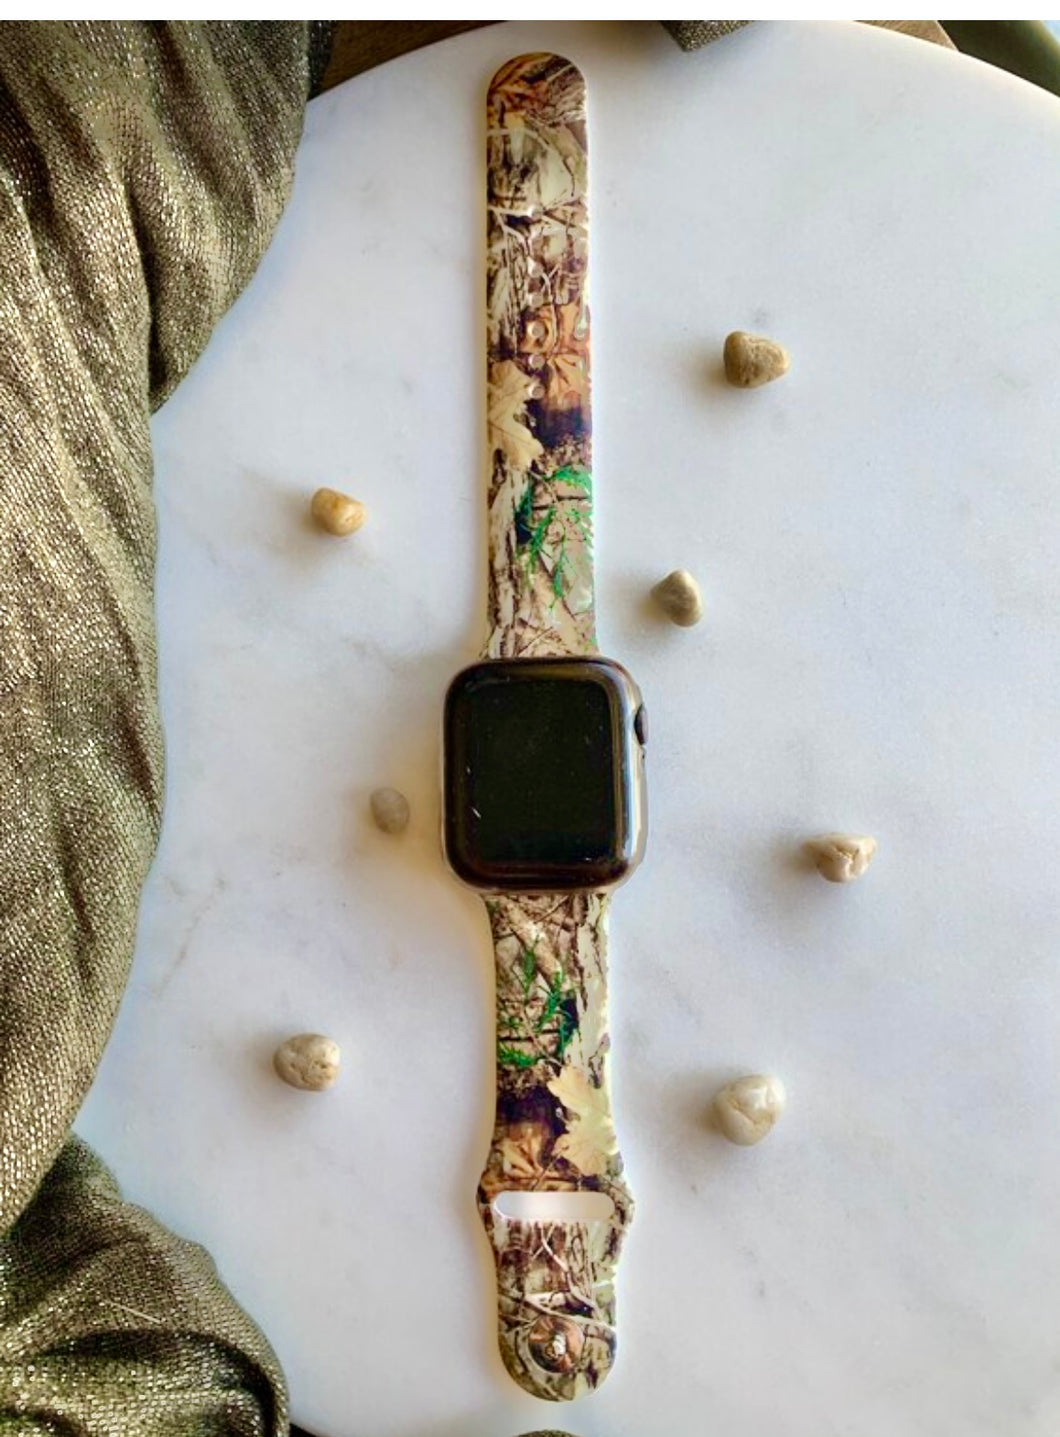 Camouflage replacement watchband